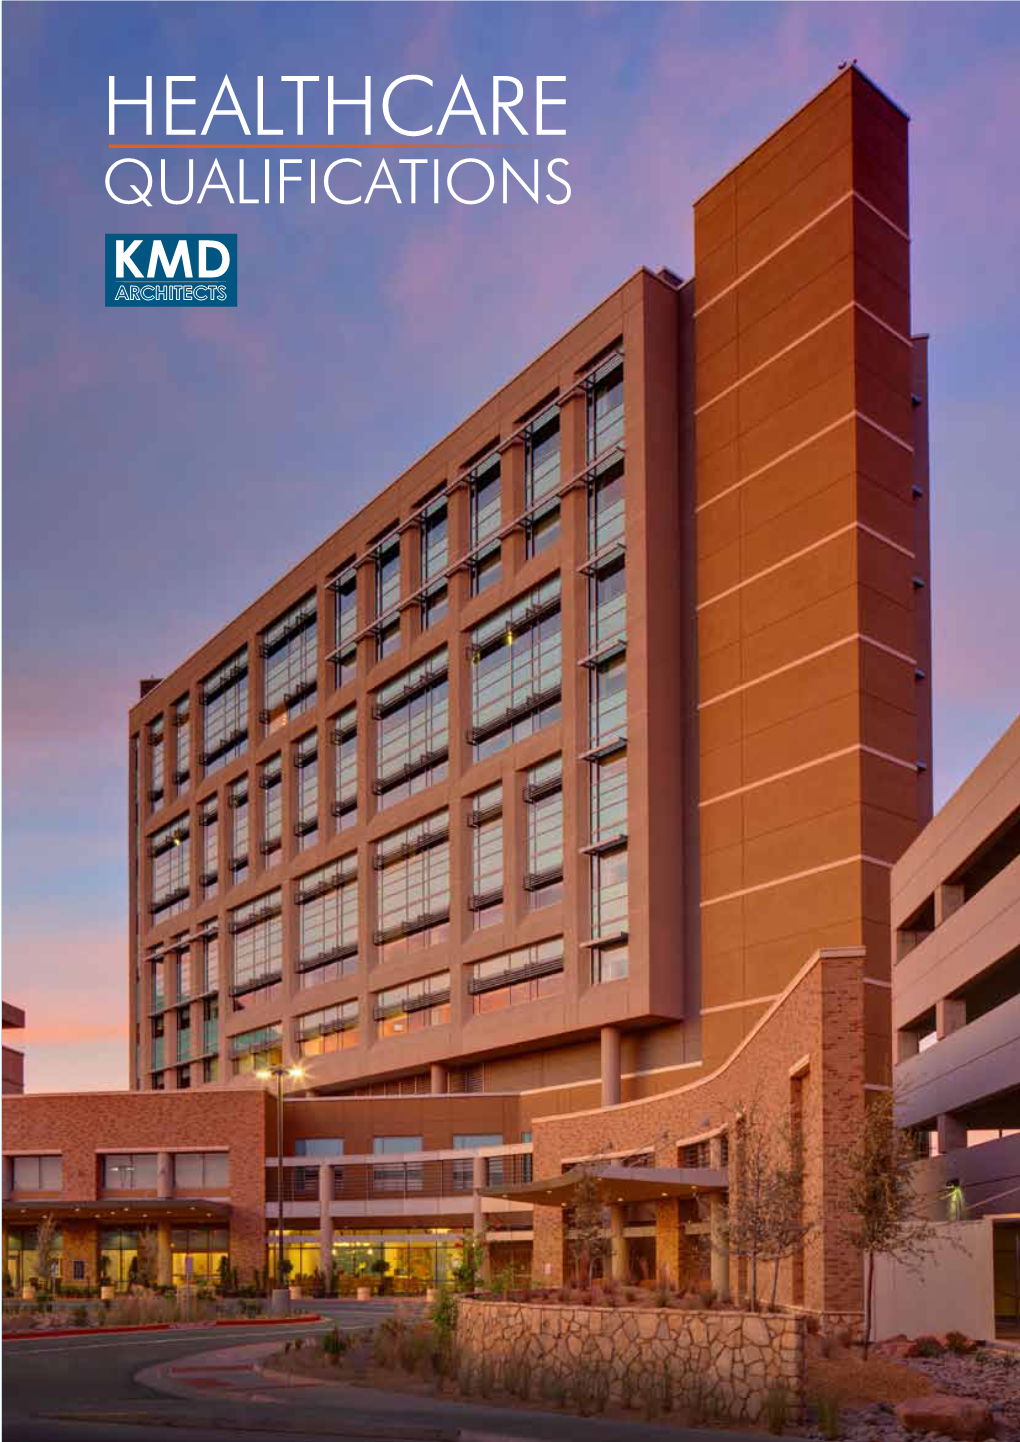 KMD's Healthcare Projects